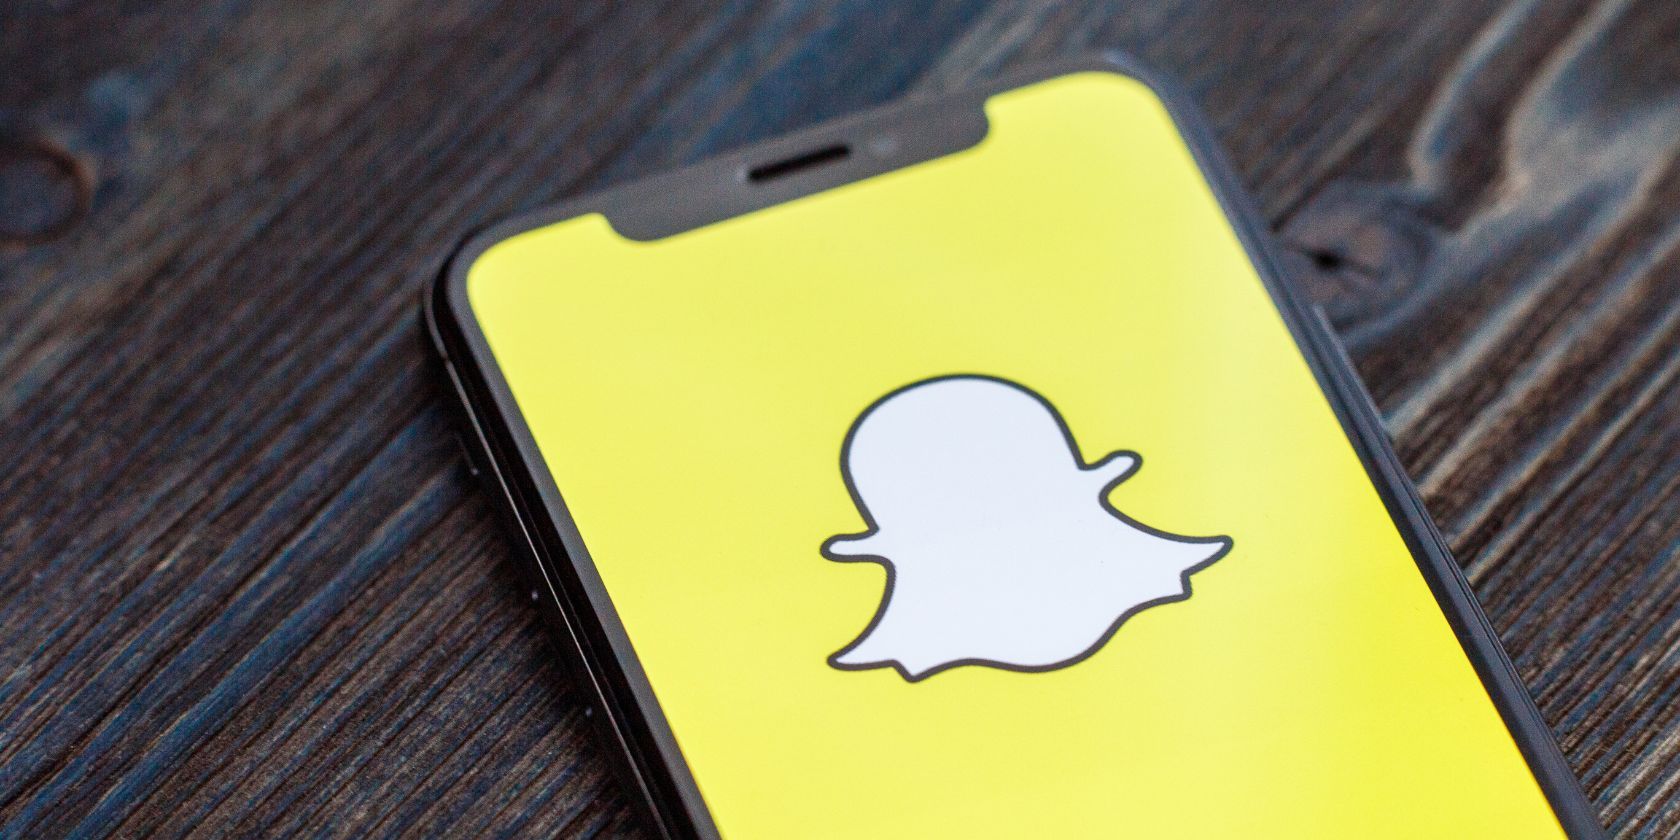 the snapchat logo on a smartphone